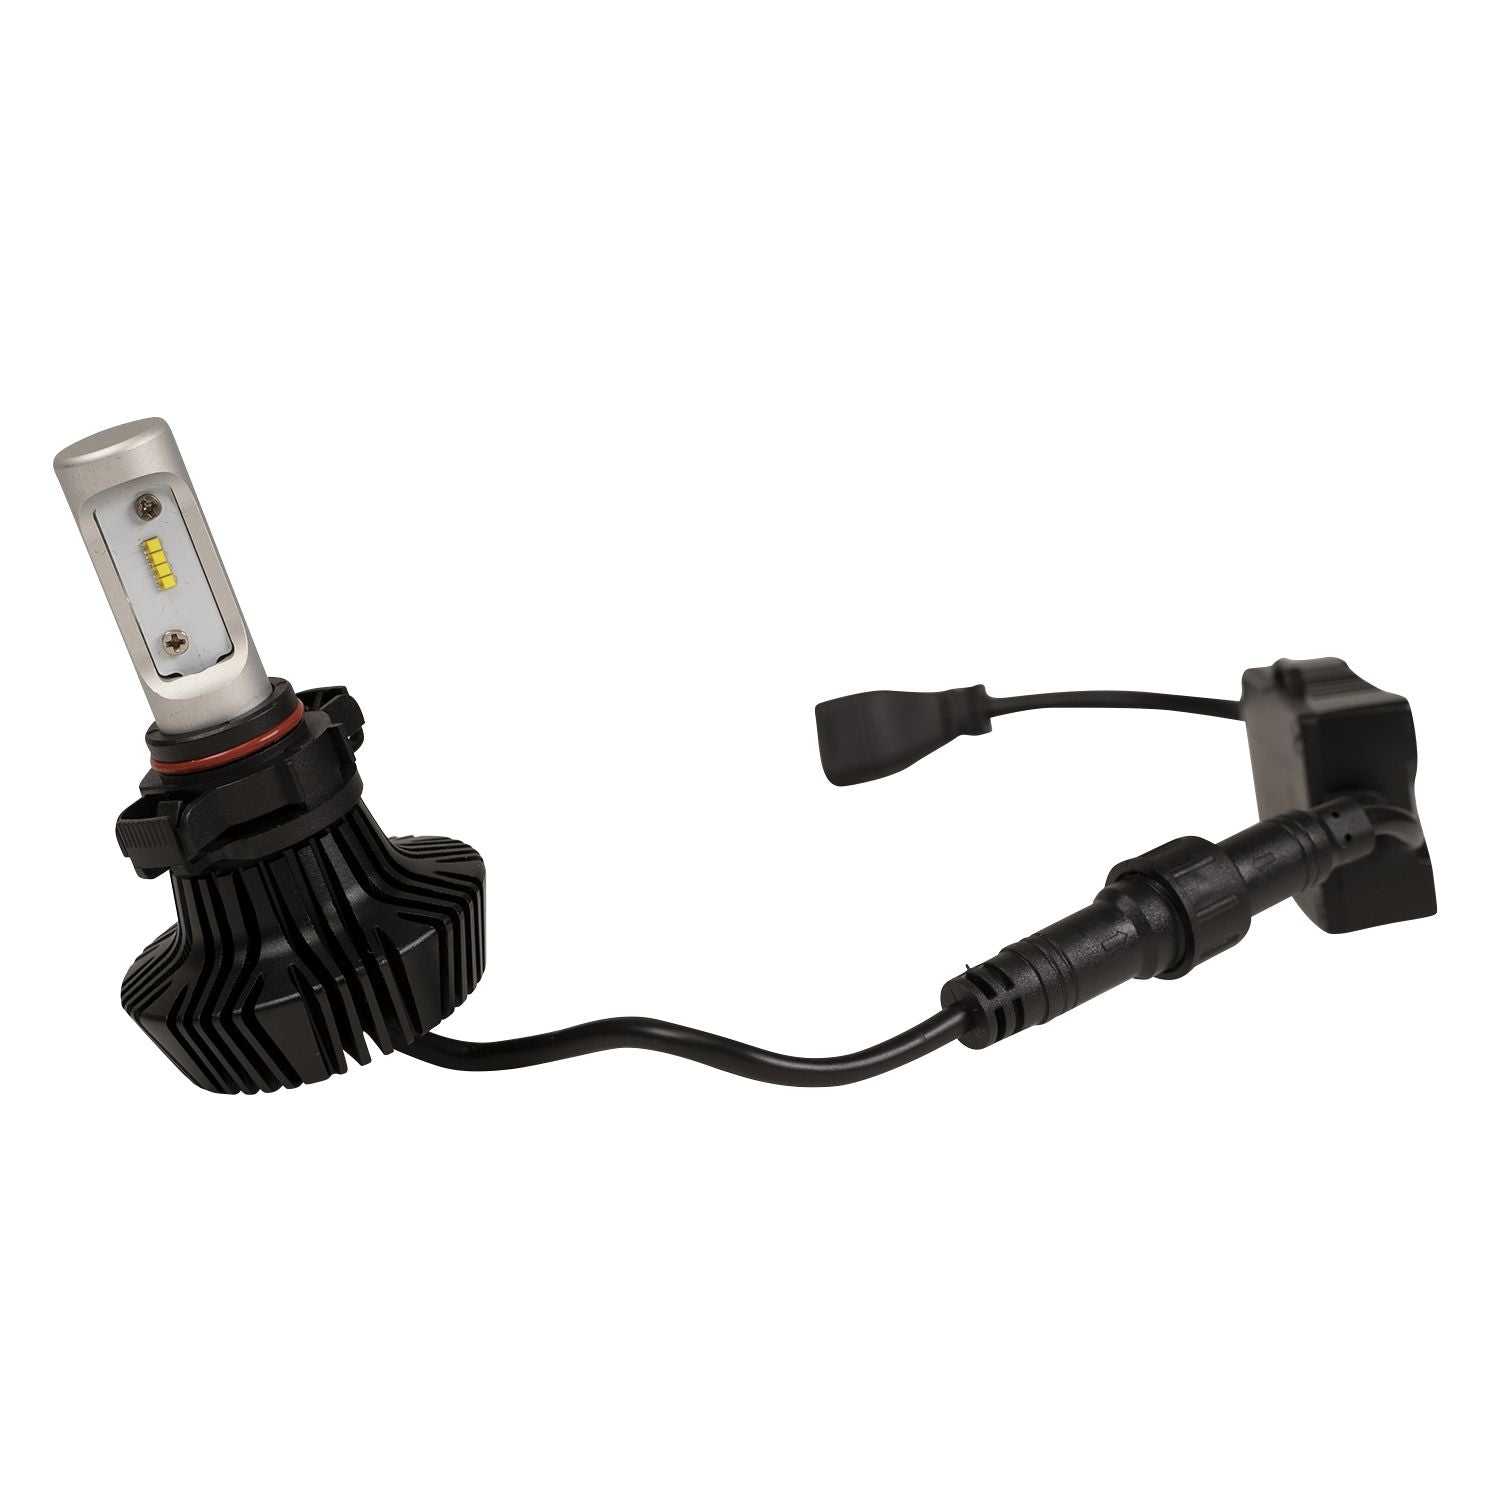 CLD CLDG72504-1 - G7 2504 LED Conversion Kit - 4000 Lumens (Sold individually)